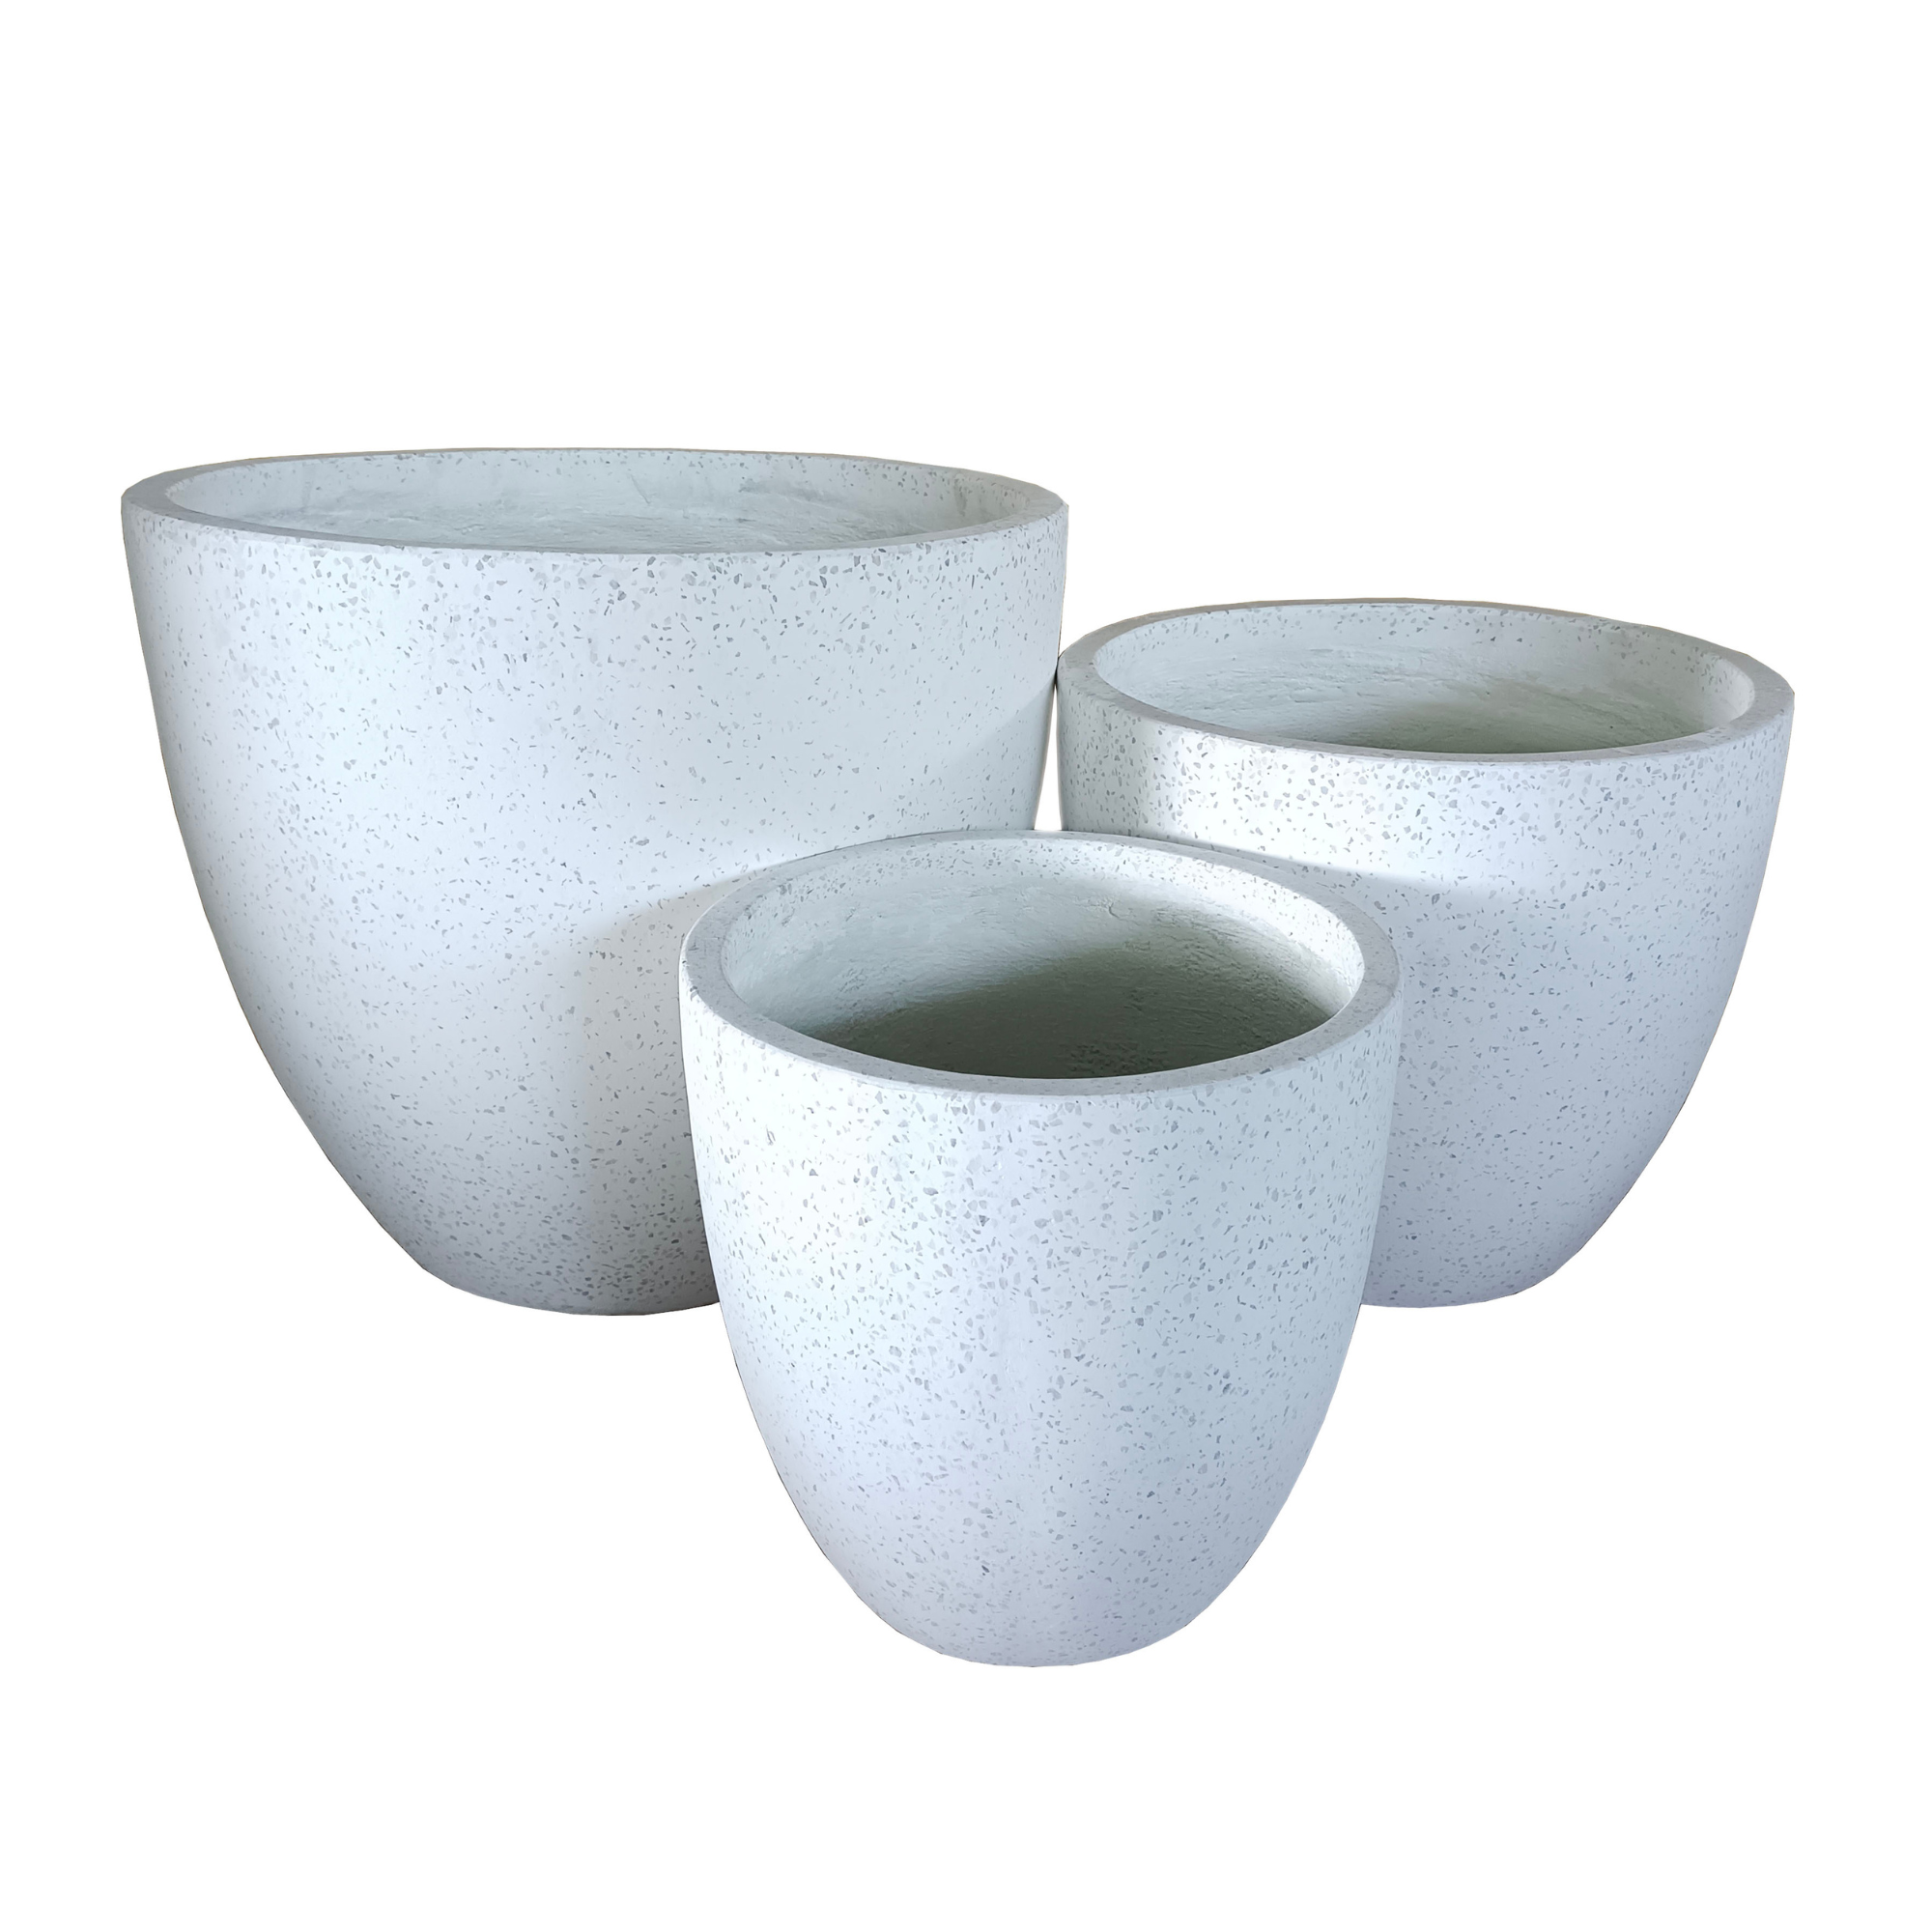 White Terrazzo Indoor/Outdoor Plant Pot By Roots30W*30D*29H. (8785194713409)